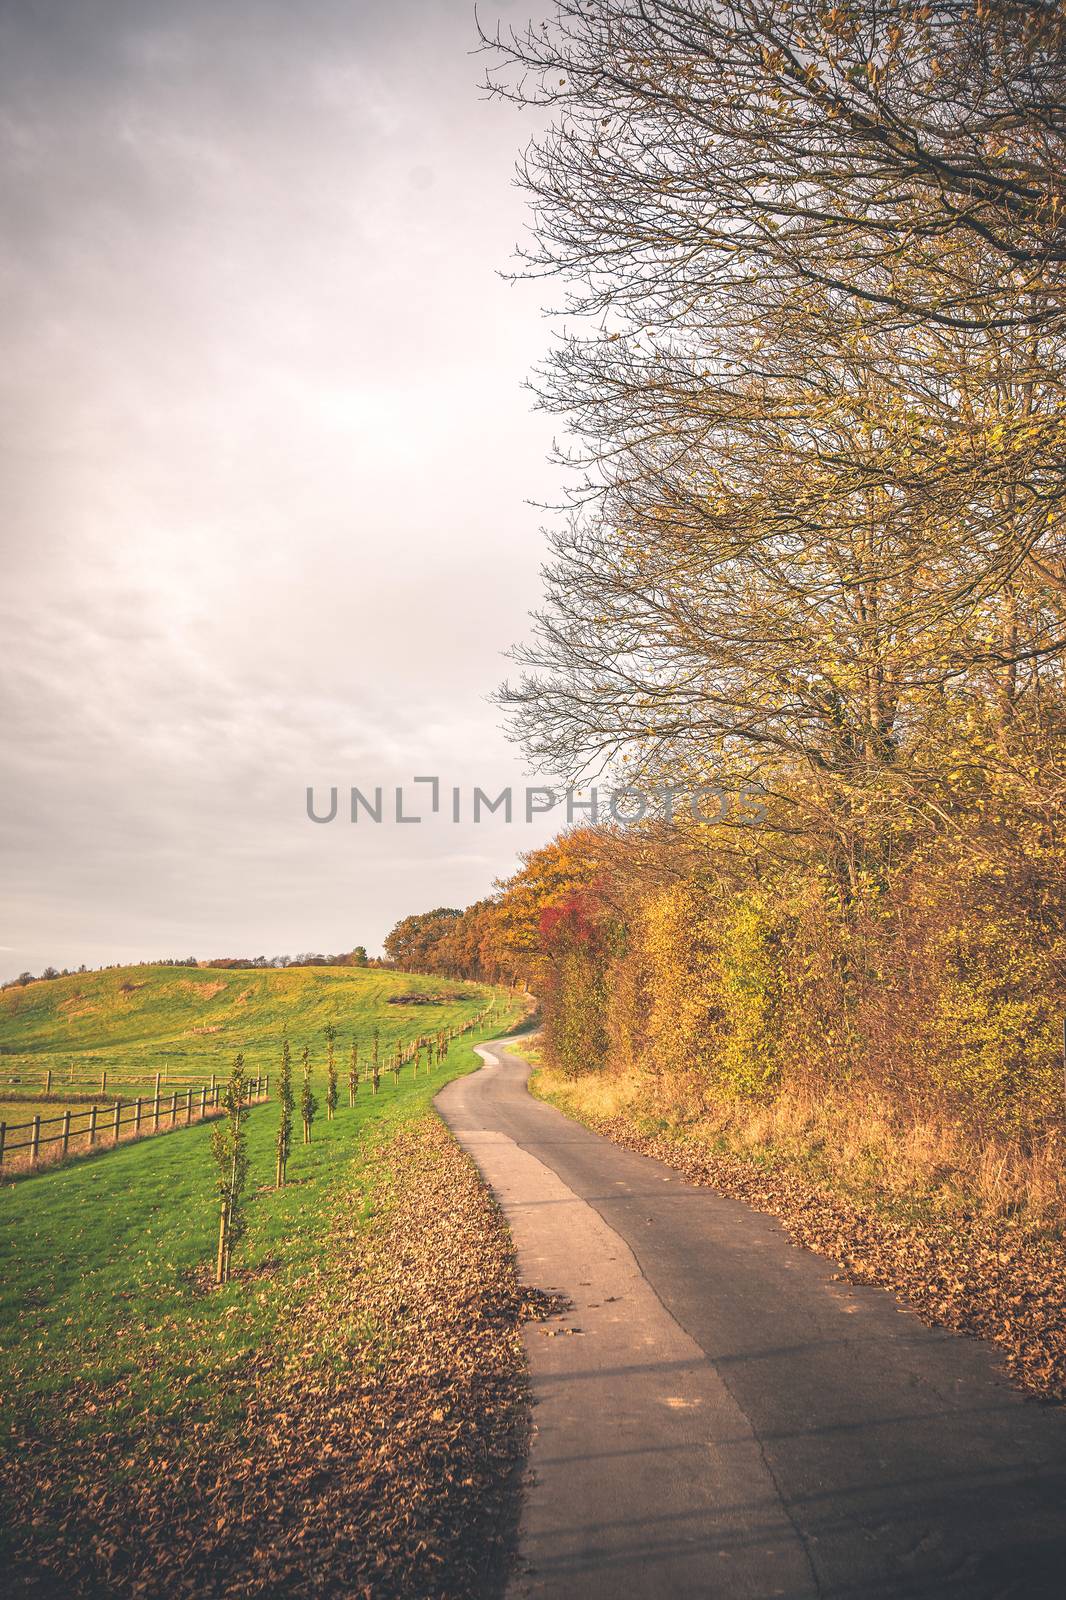 Curvy road in a countryside landscape by Sportactive